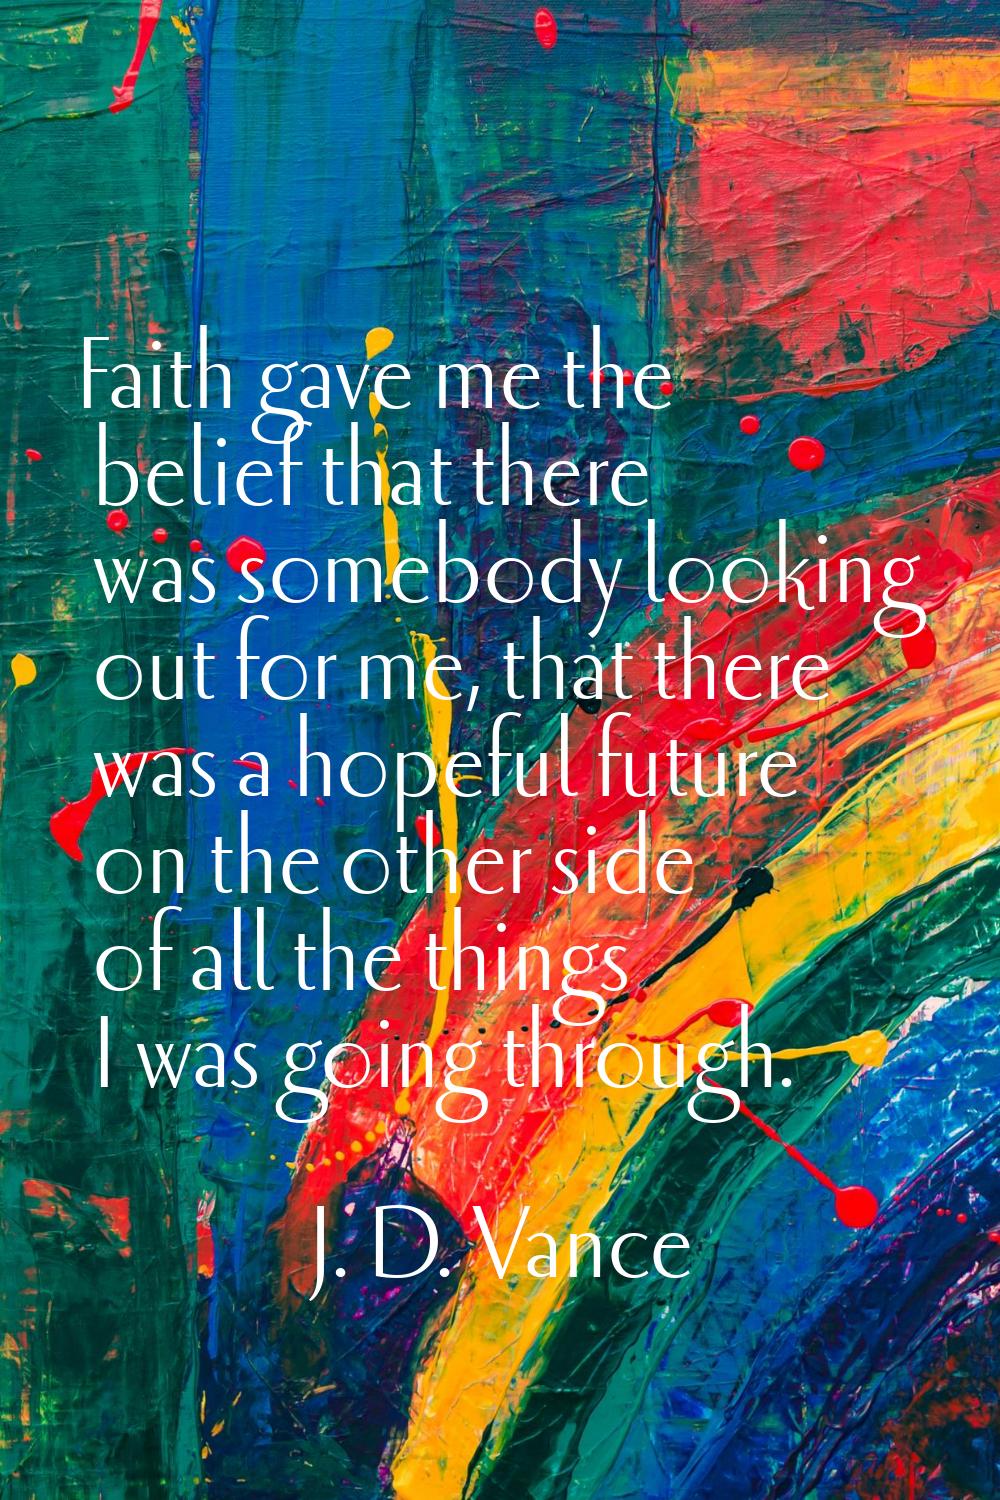 Faith gave me the belief that there was somebody looking out for me, that there was a hopeful futur